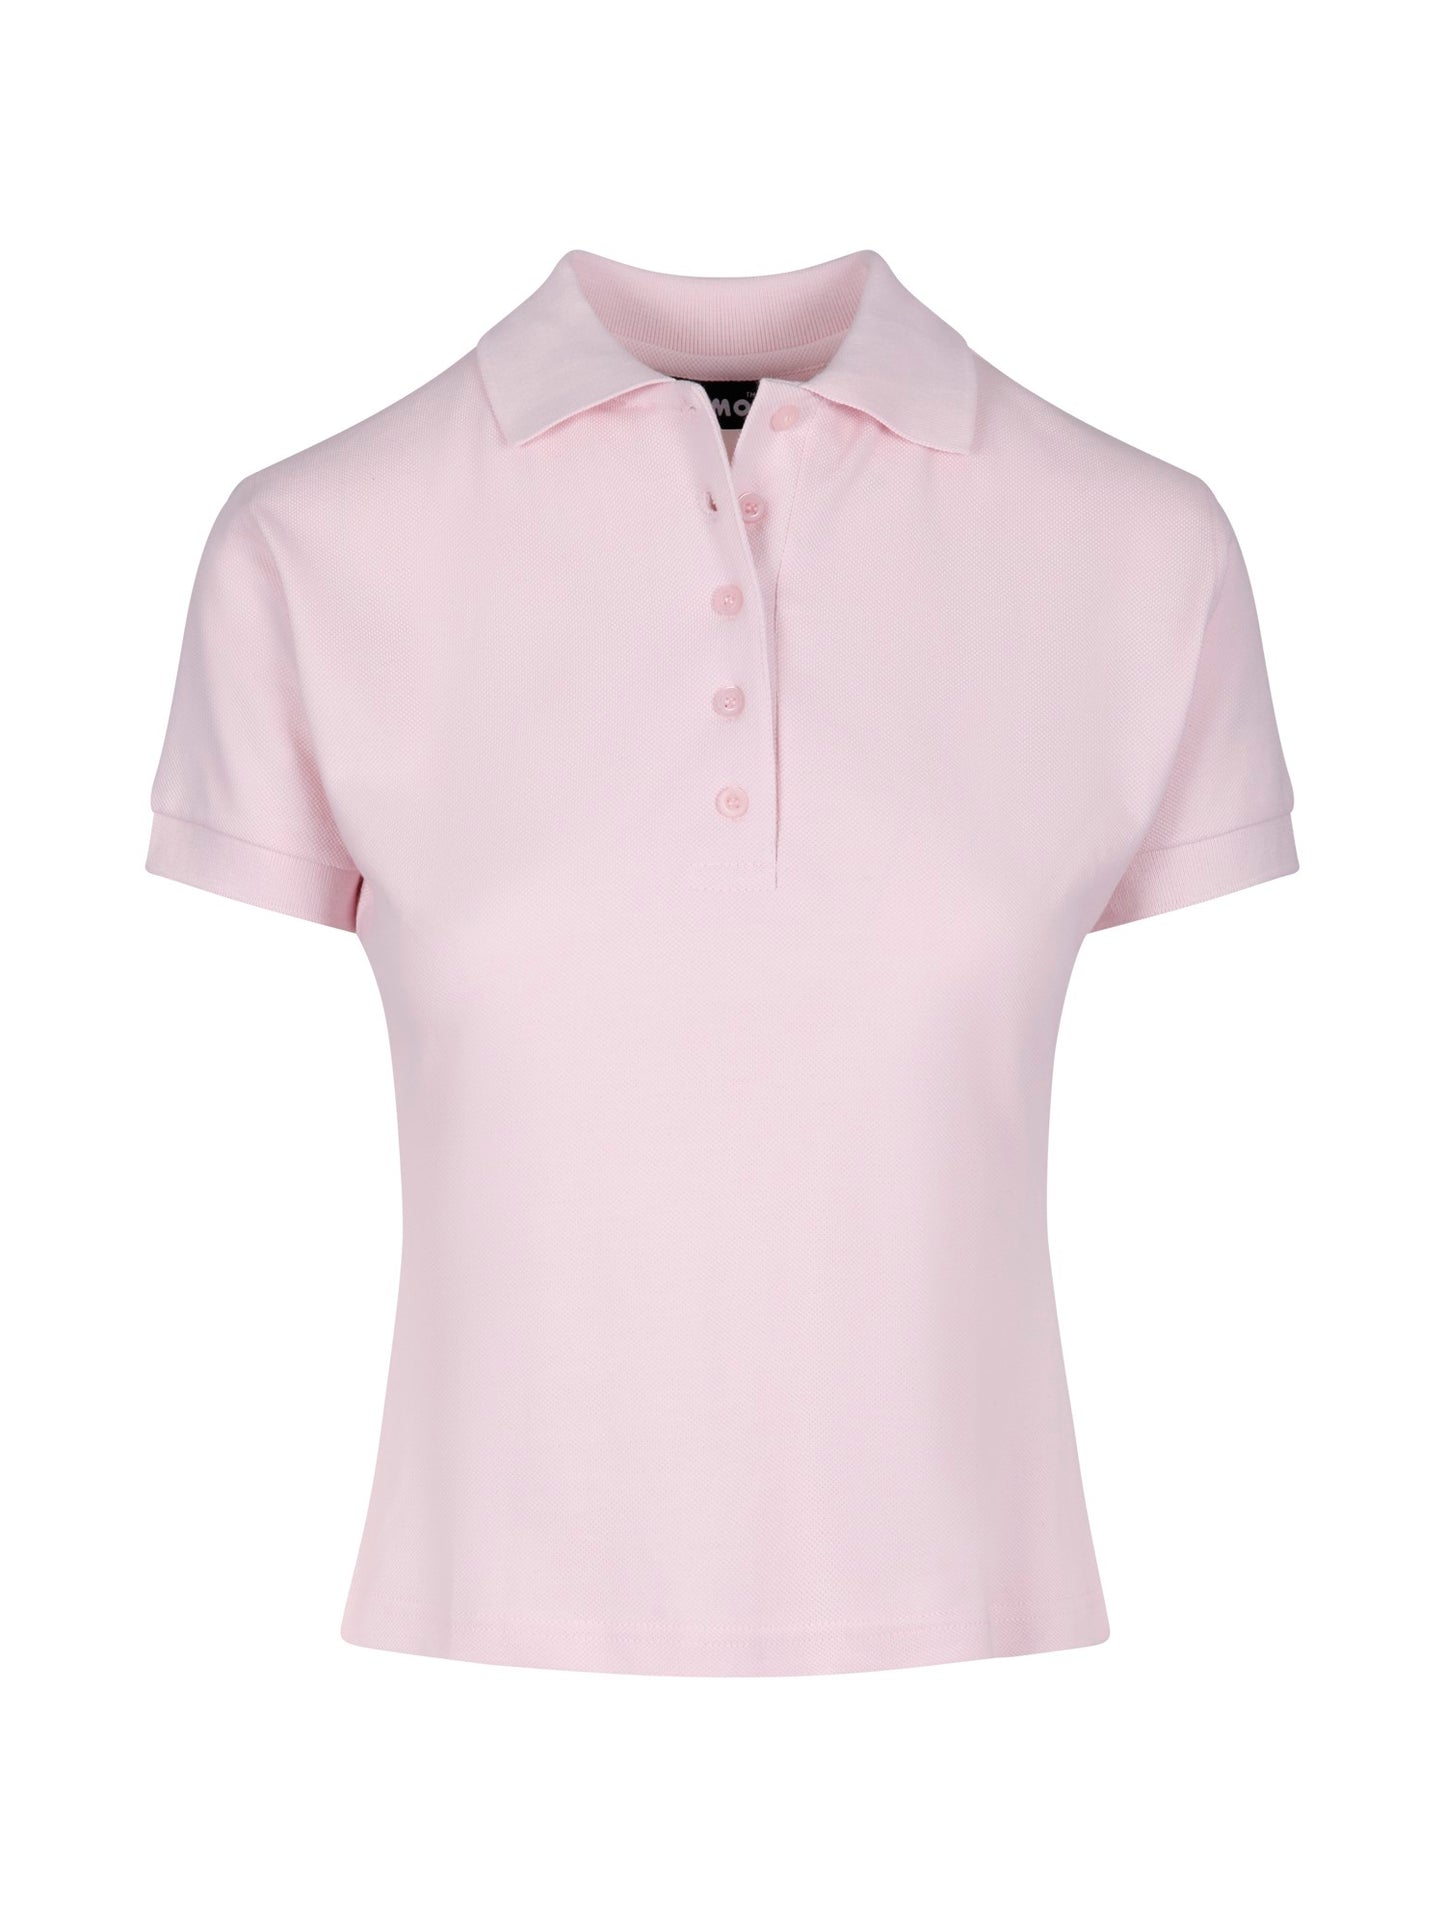 Ladies Soft Pink Polo